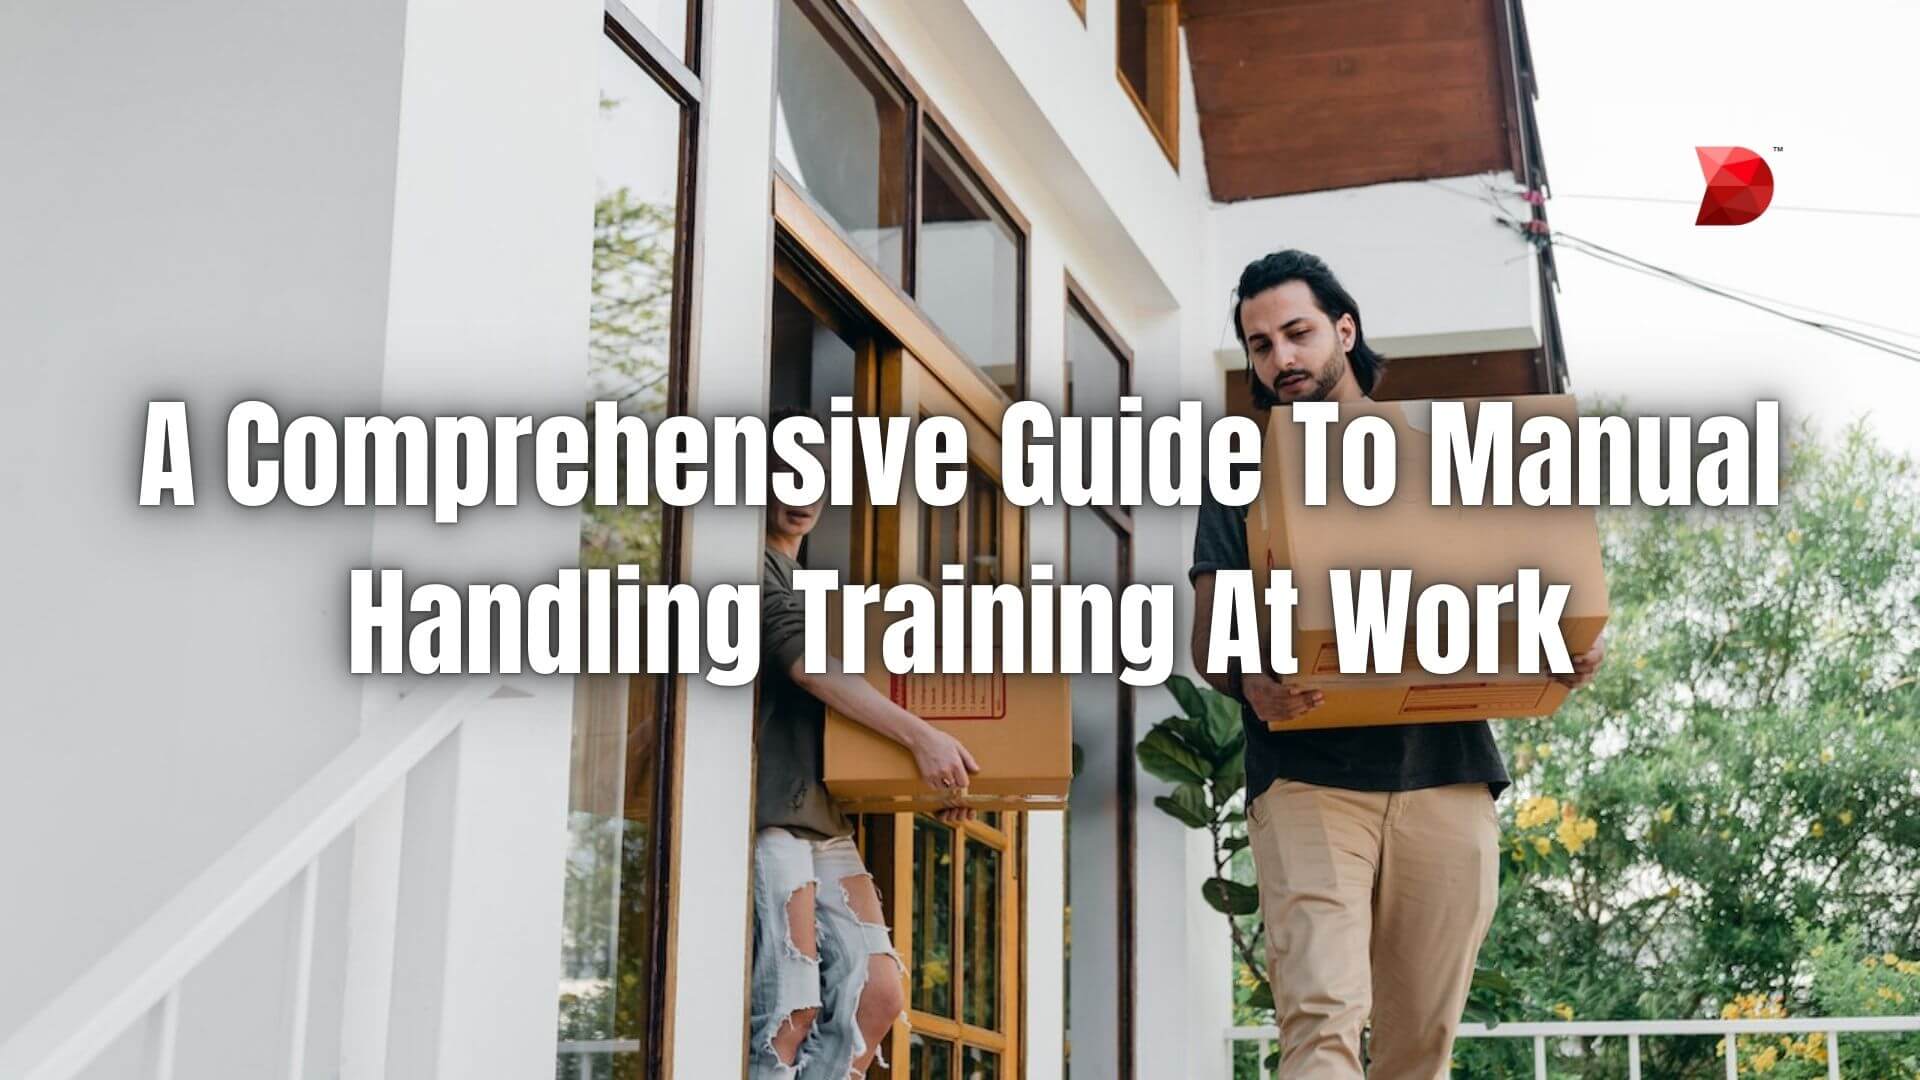 A Comprehensive Guide To Manual Handling Training At Work